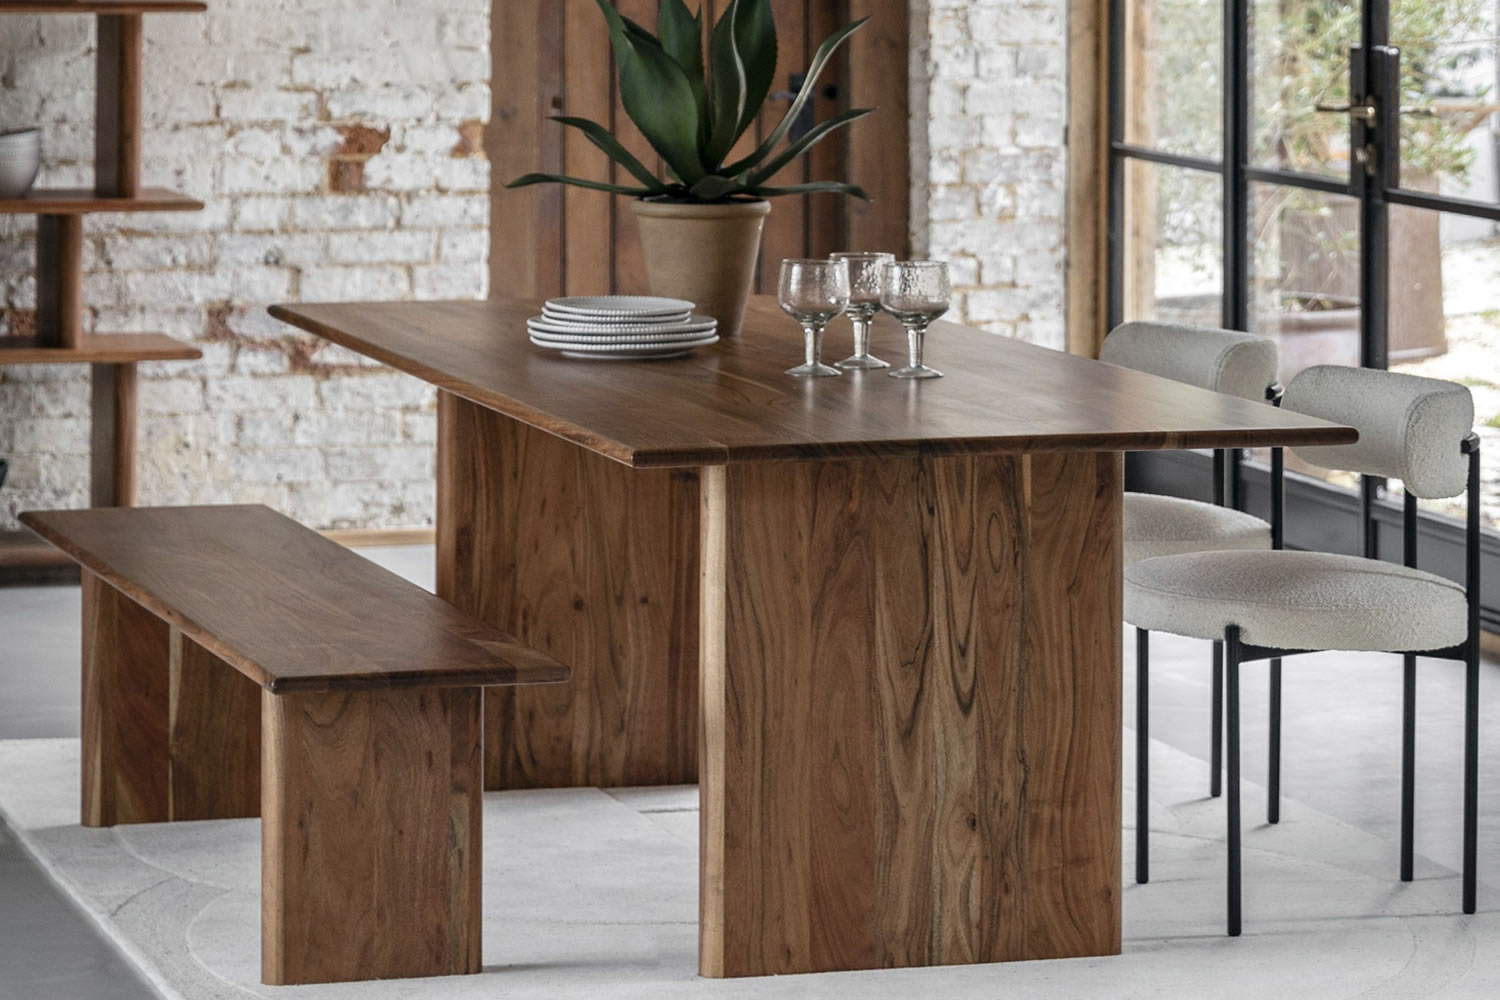 View Small Borden Wooden Kitchen Dining Table Crafted From Solid Acacia Wood Rich Grain Finish Robust Solid Legs Seats Up To 68 People information